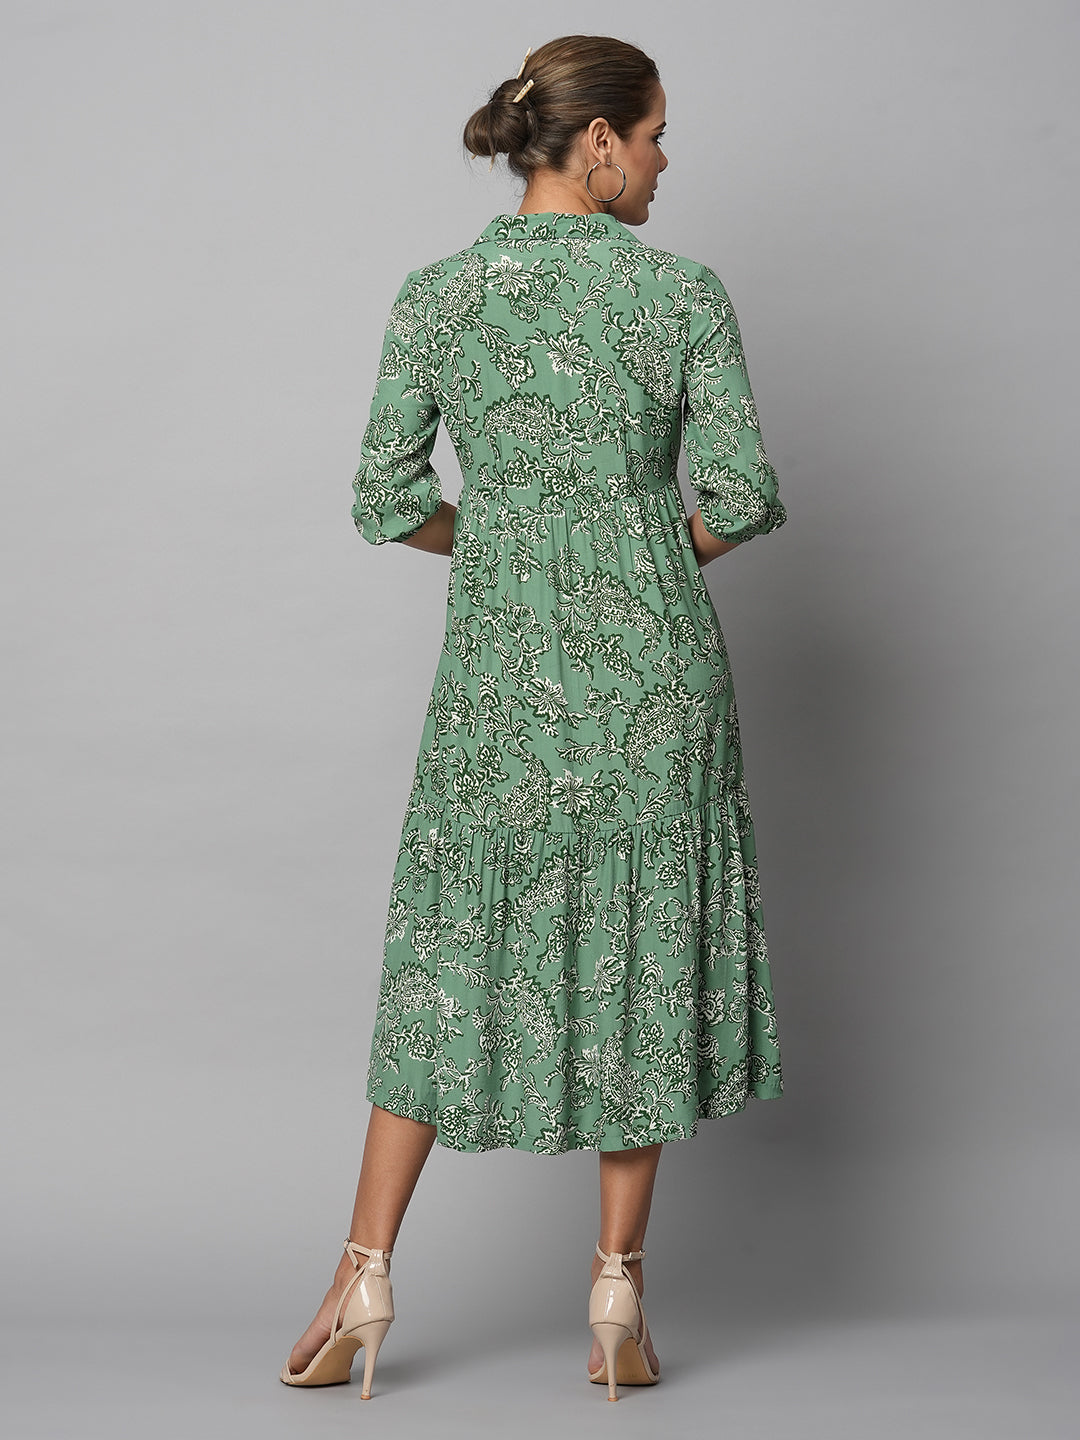 Noteched Collar Printed Viscose Tiered Dress